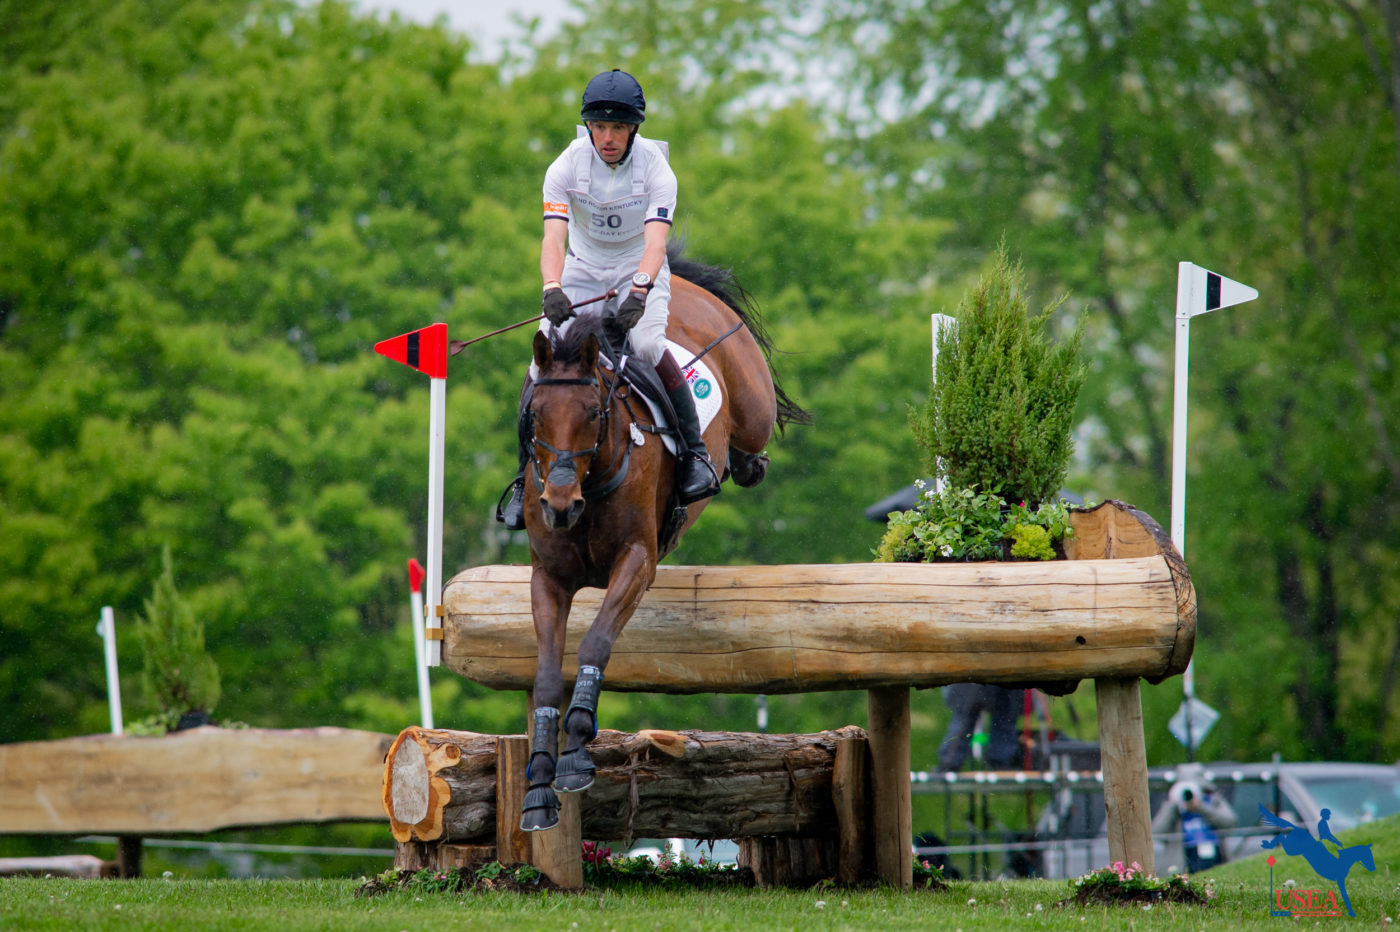 CCI5*-L - 4th - Harry Meade and Superstition. Erin Gilmore Photo.